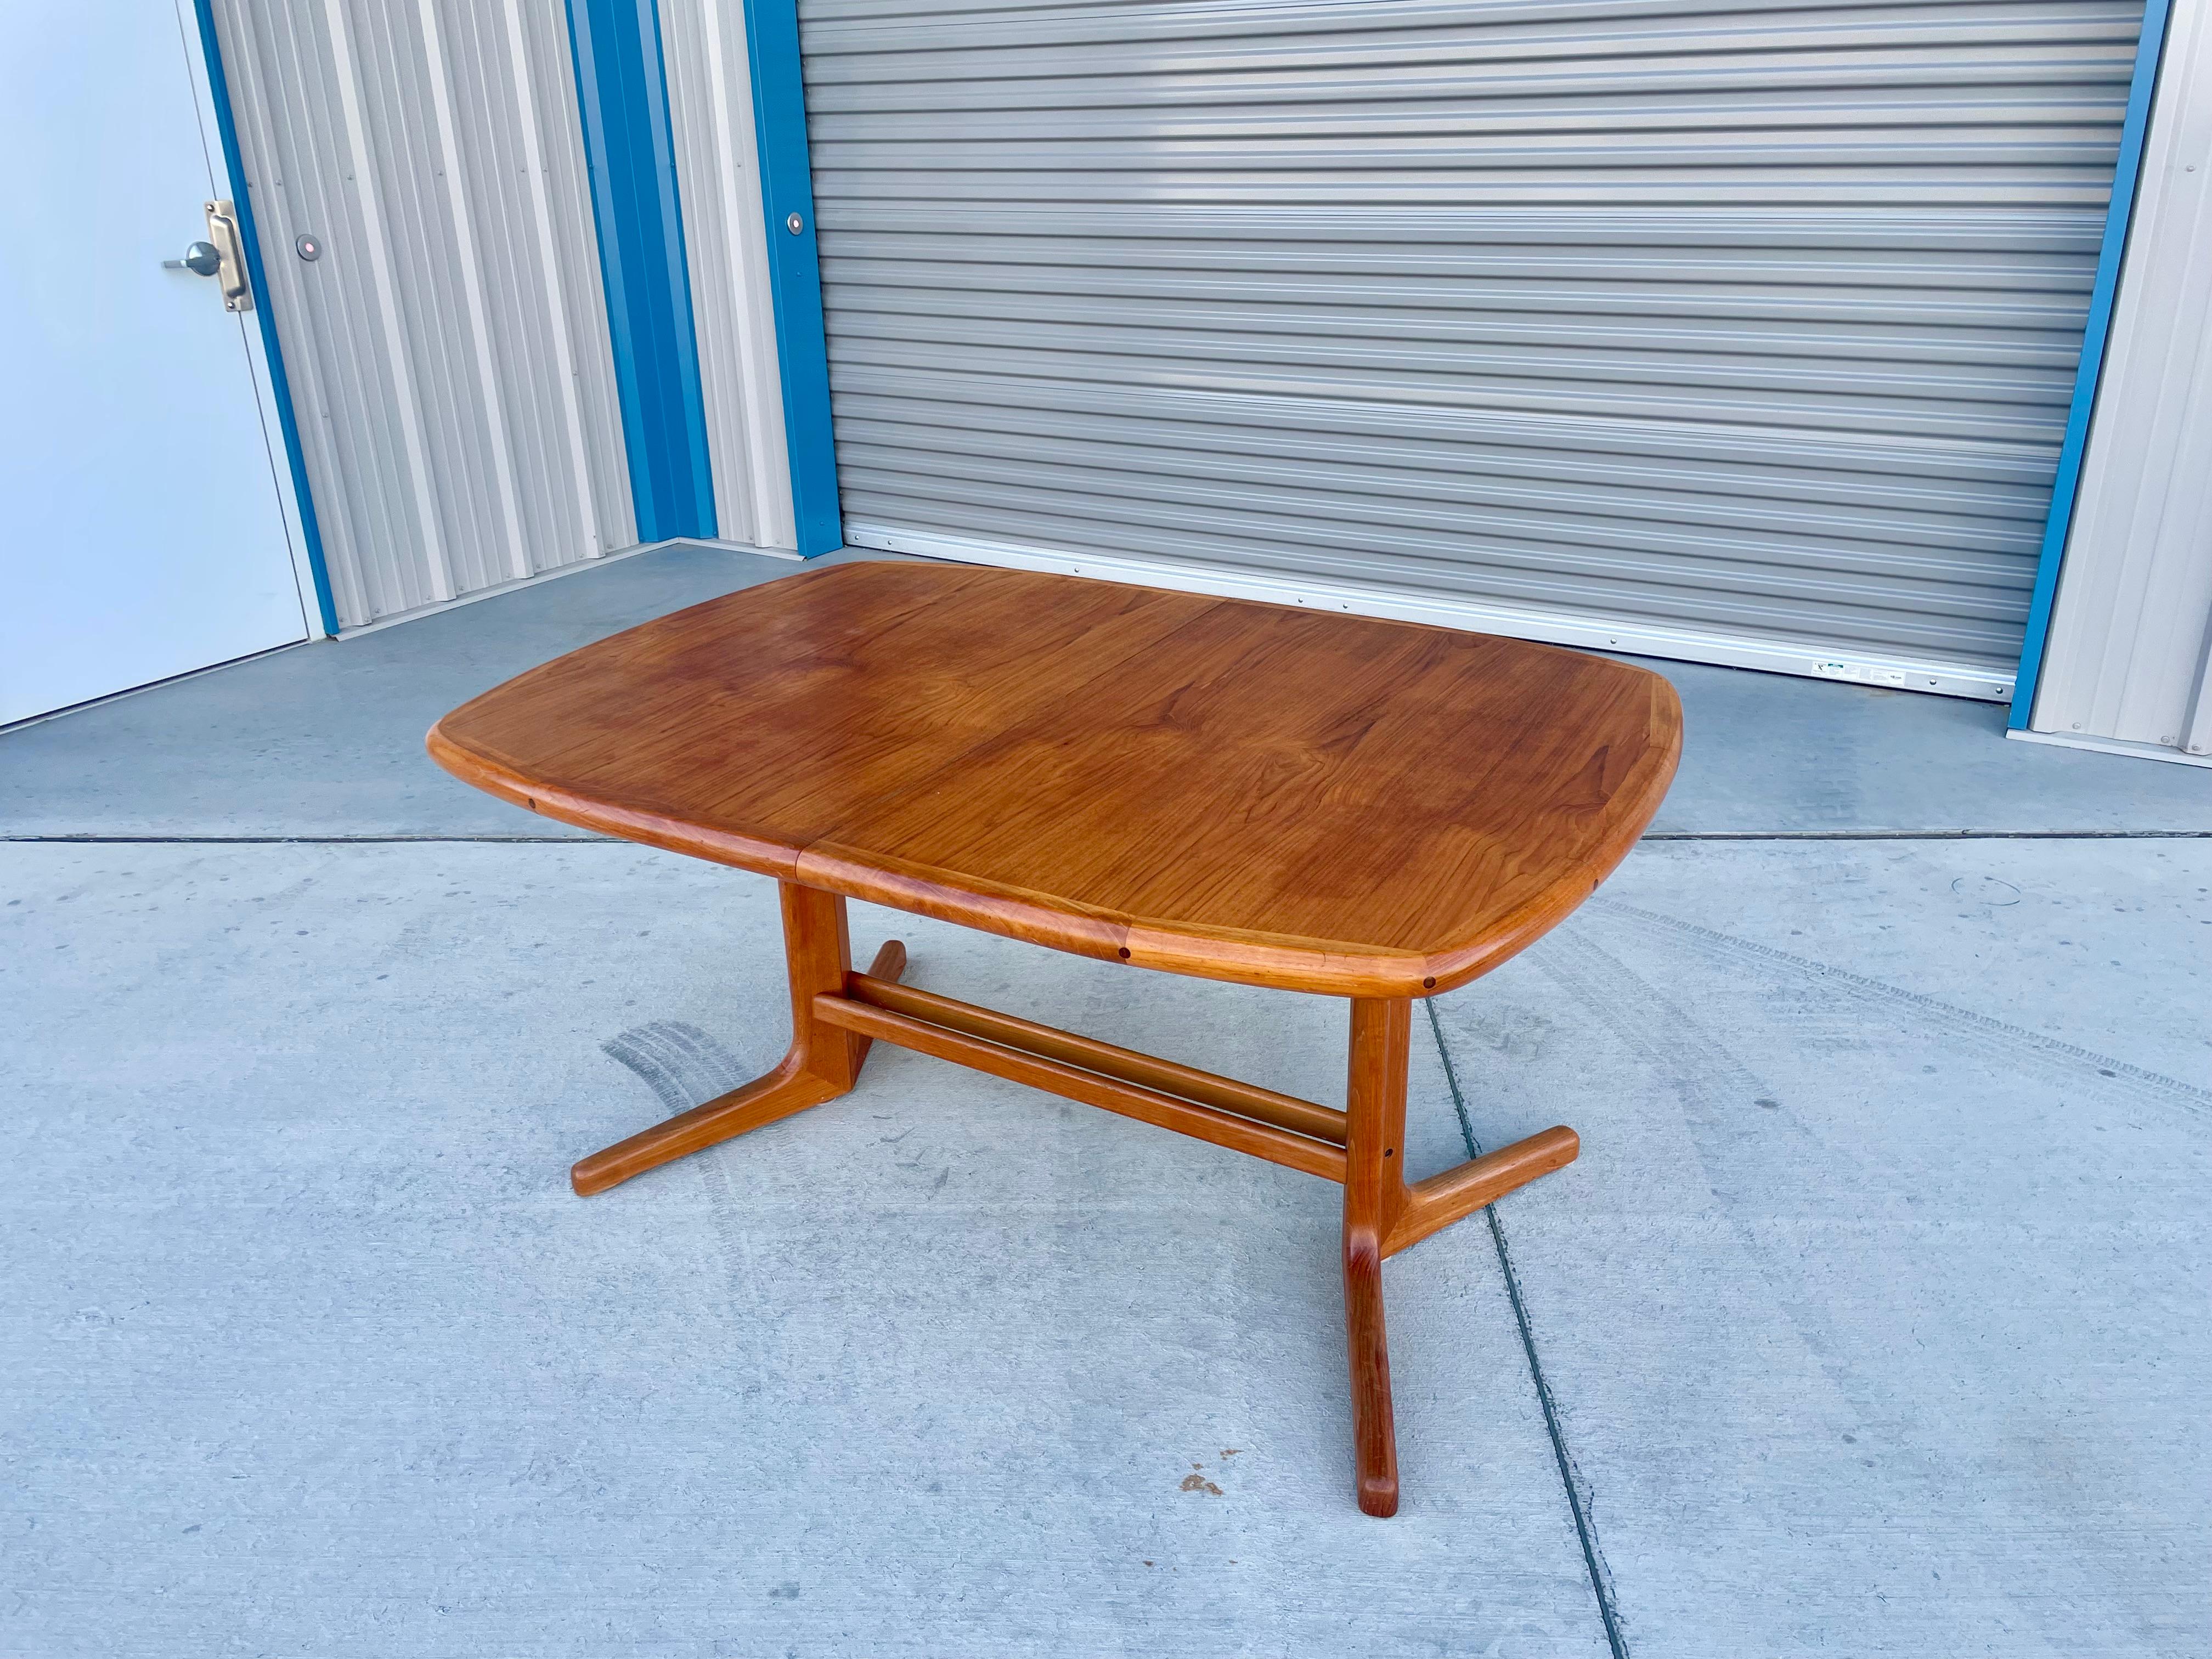 1960s Danish Modern Teak Dining Table In Good Condition For Sale In North Hollywood, CA